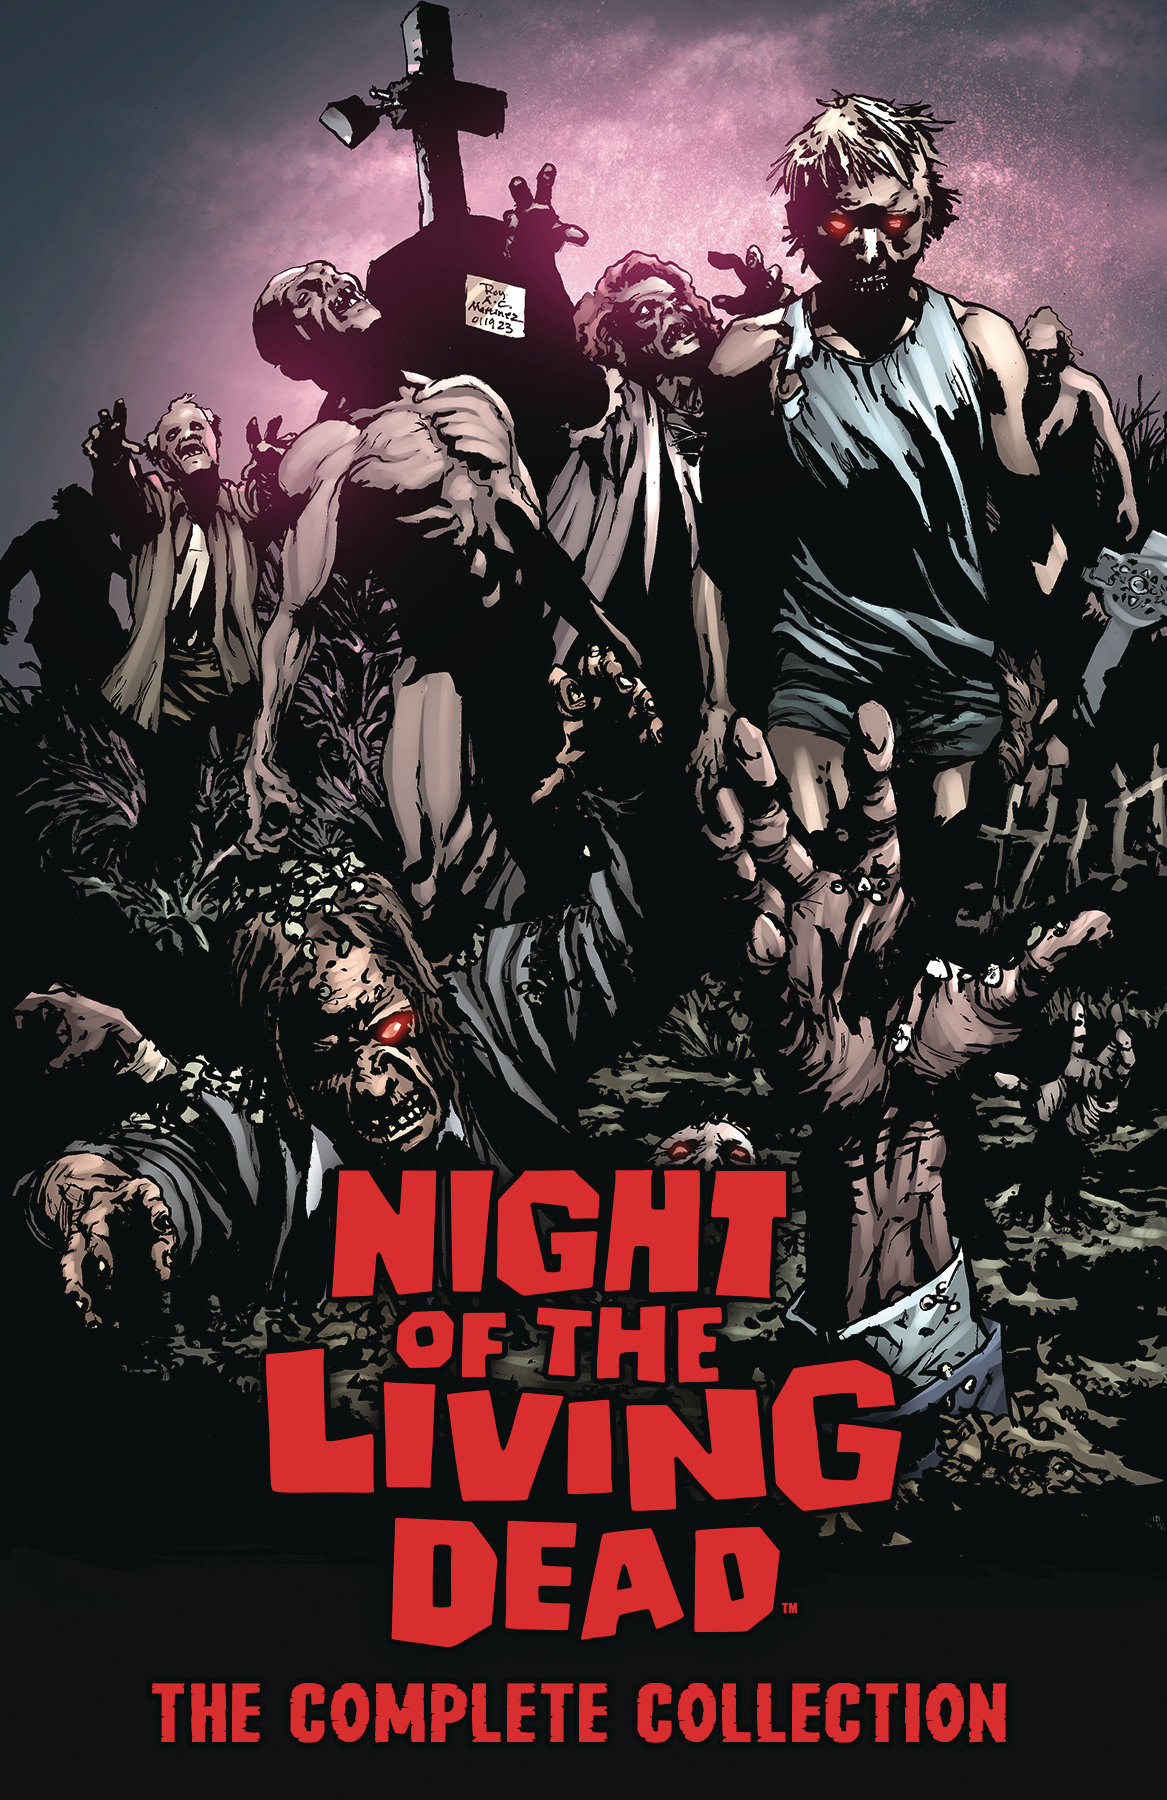 Night of the Living Dead Complete Collection Graphic Novel